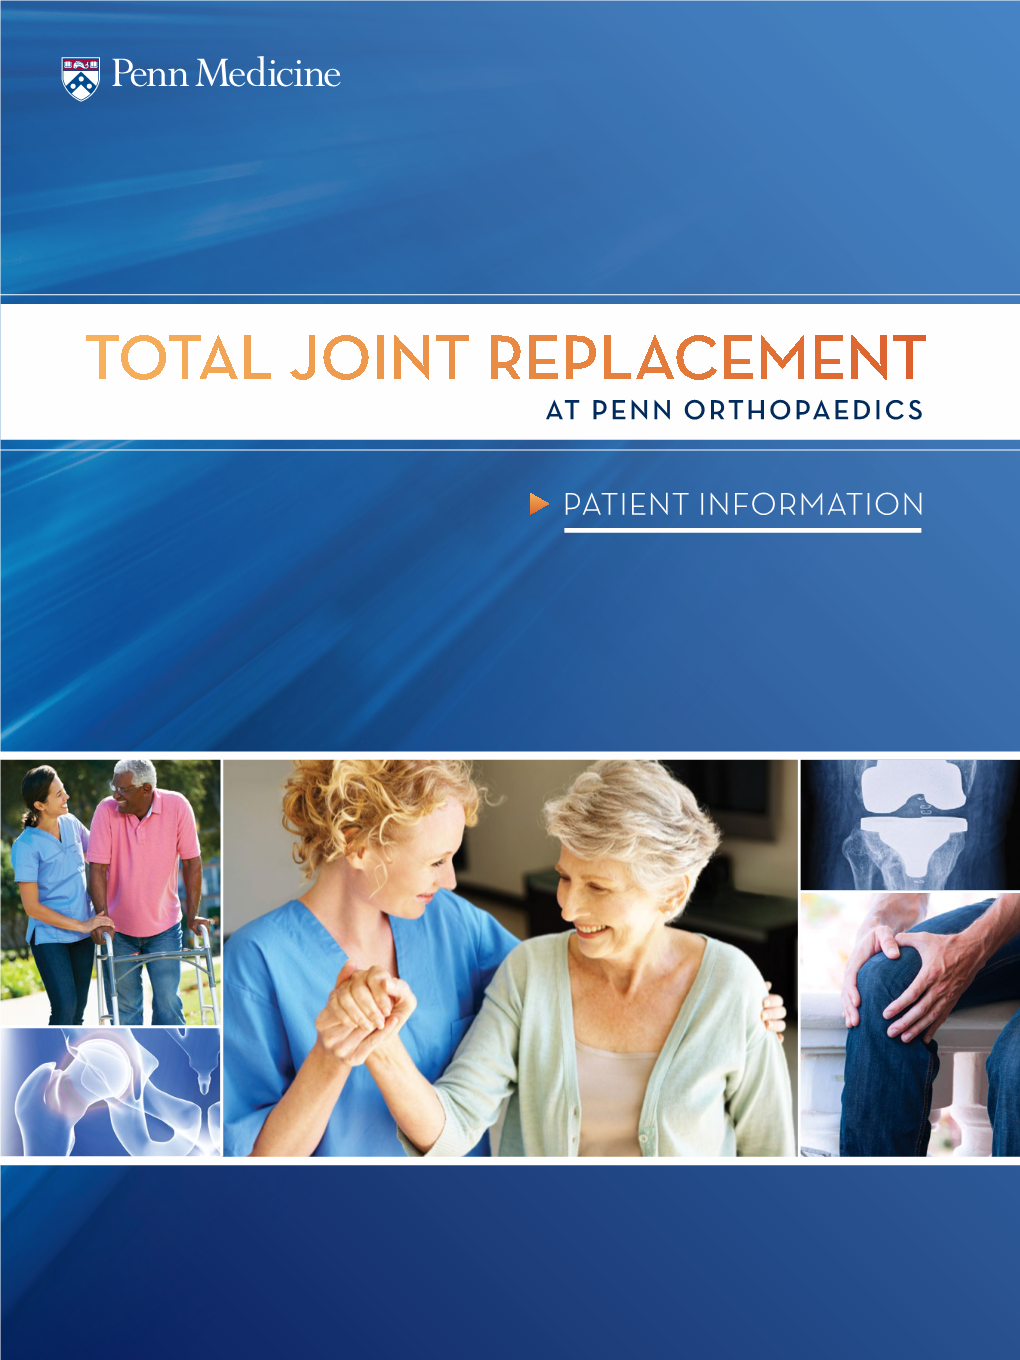 Total Joint Replacement at Penn Orthopaedics